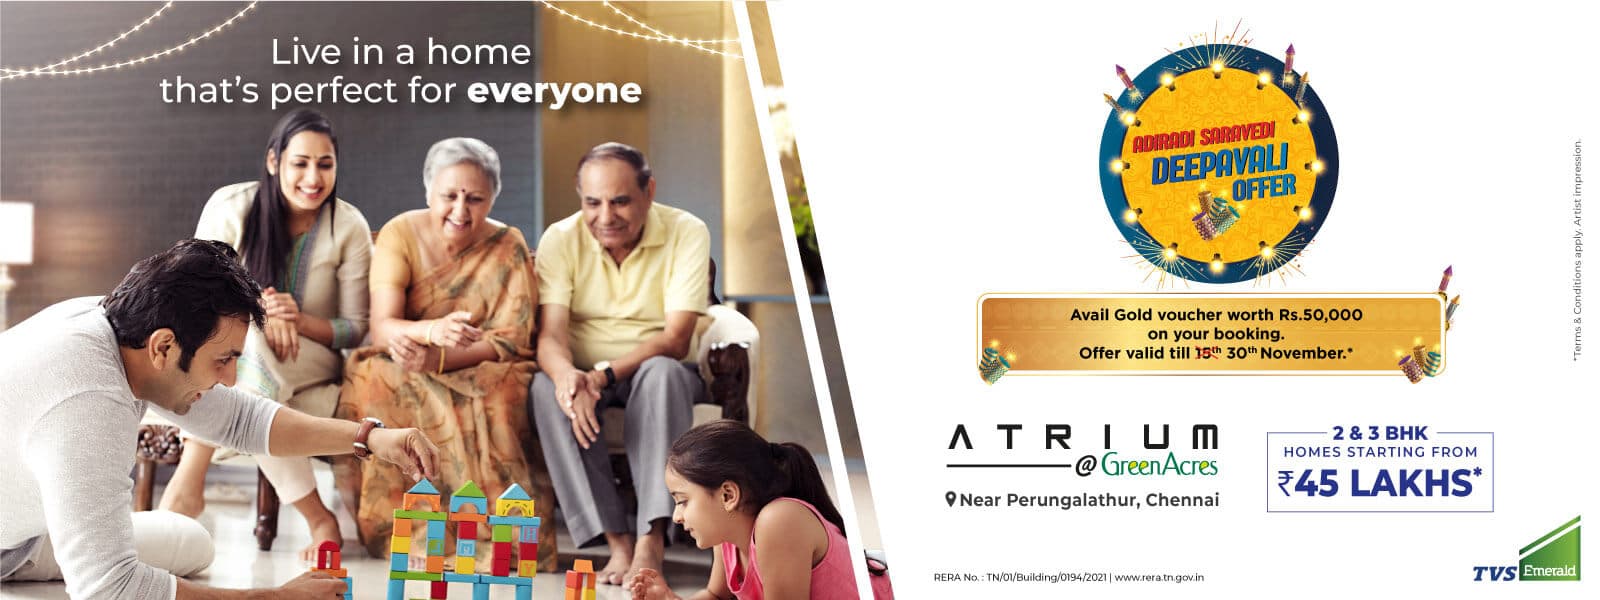 Avail gold voucher worth Rs.50,000 on your booking at TVS Emerald Atrium, Chennai